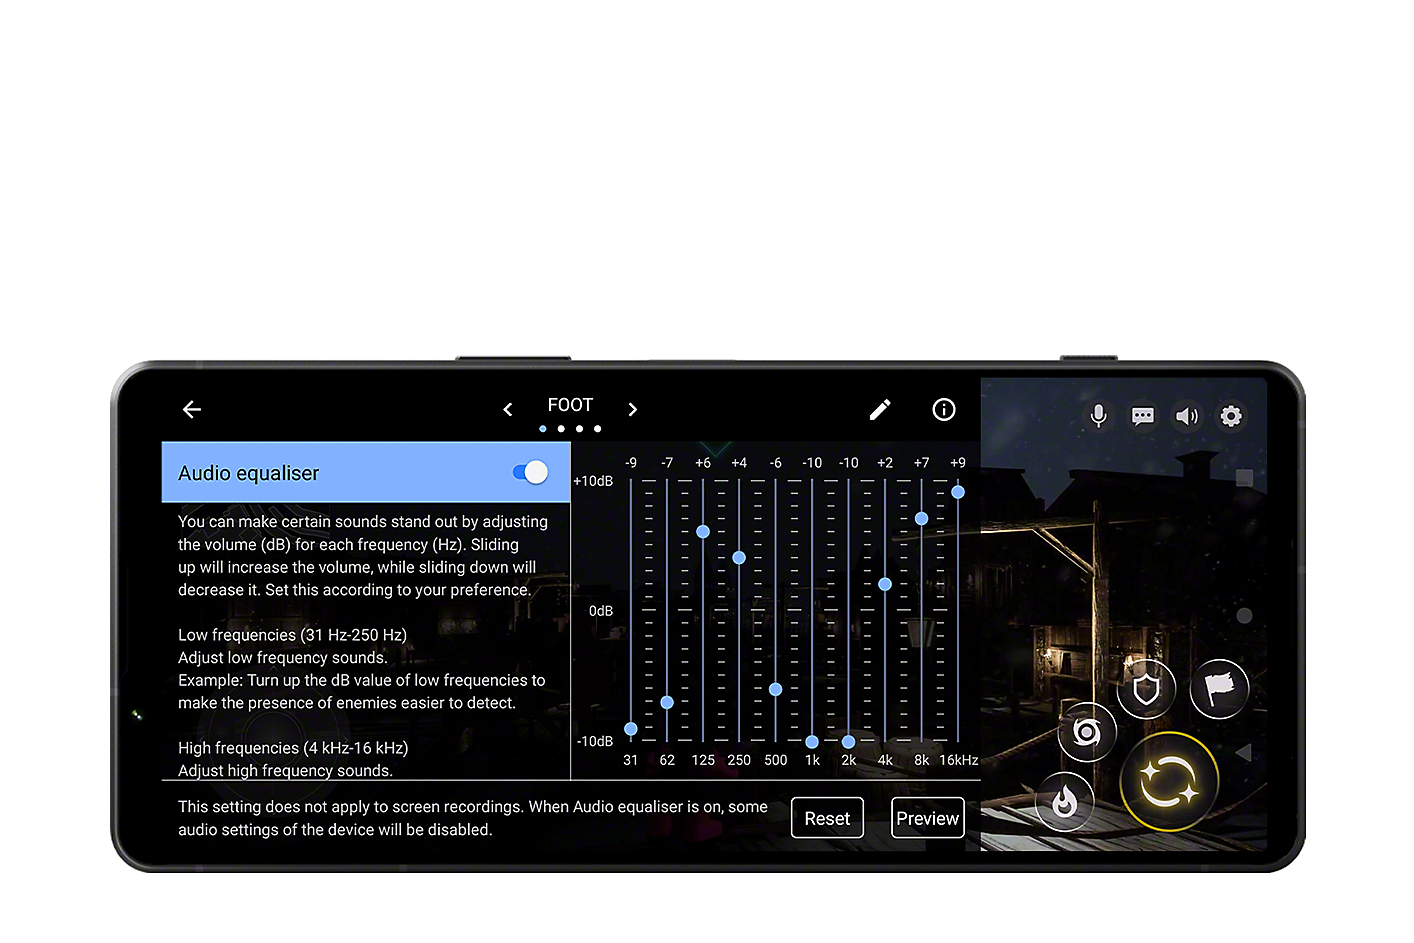 Xperia 1 V showing a gaming screen with the Audio equalizer UI